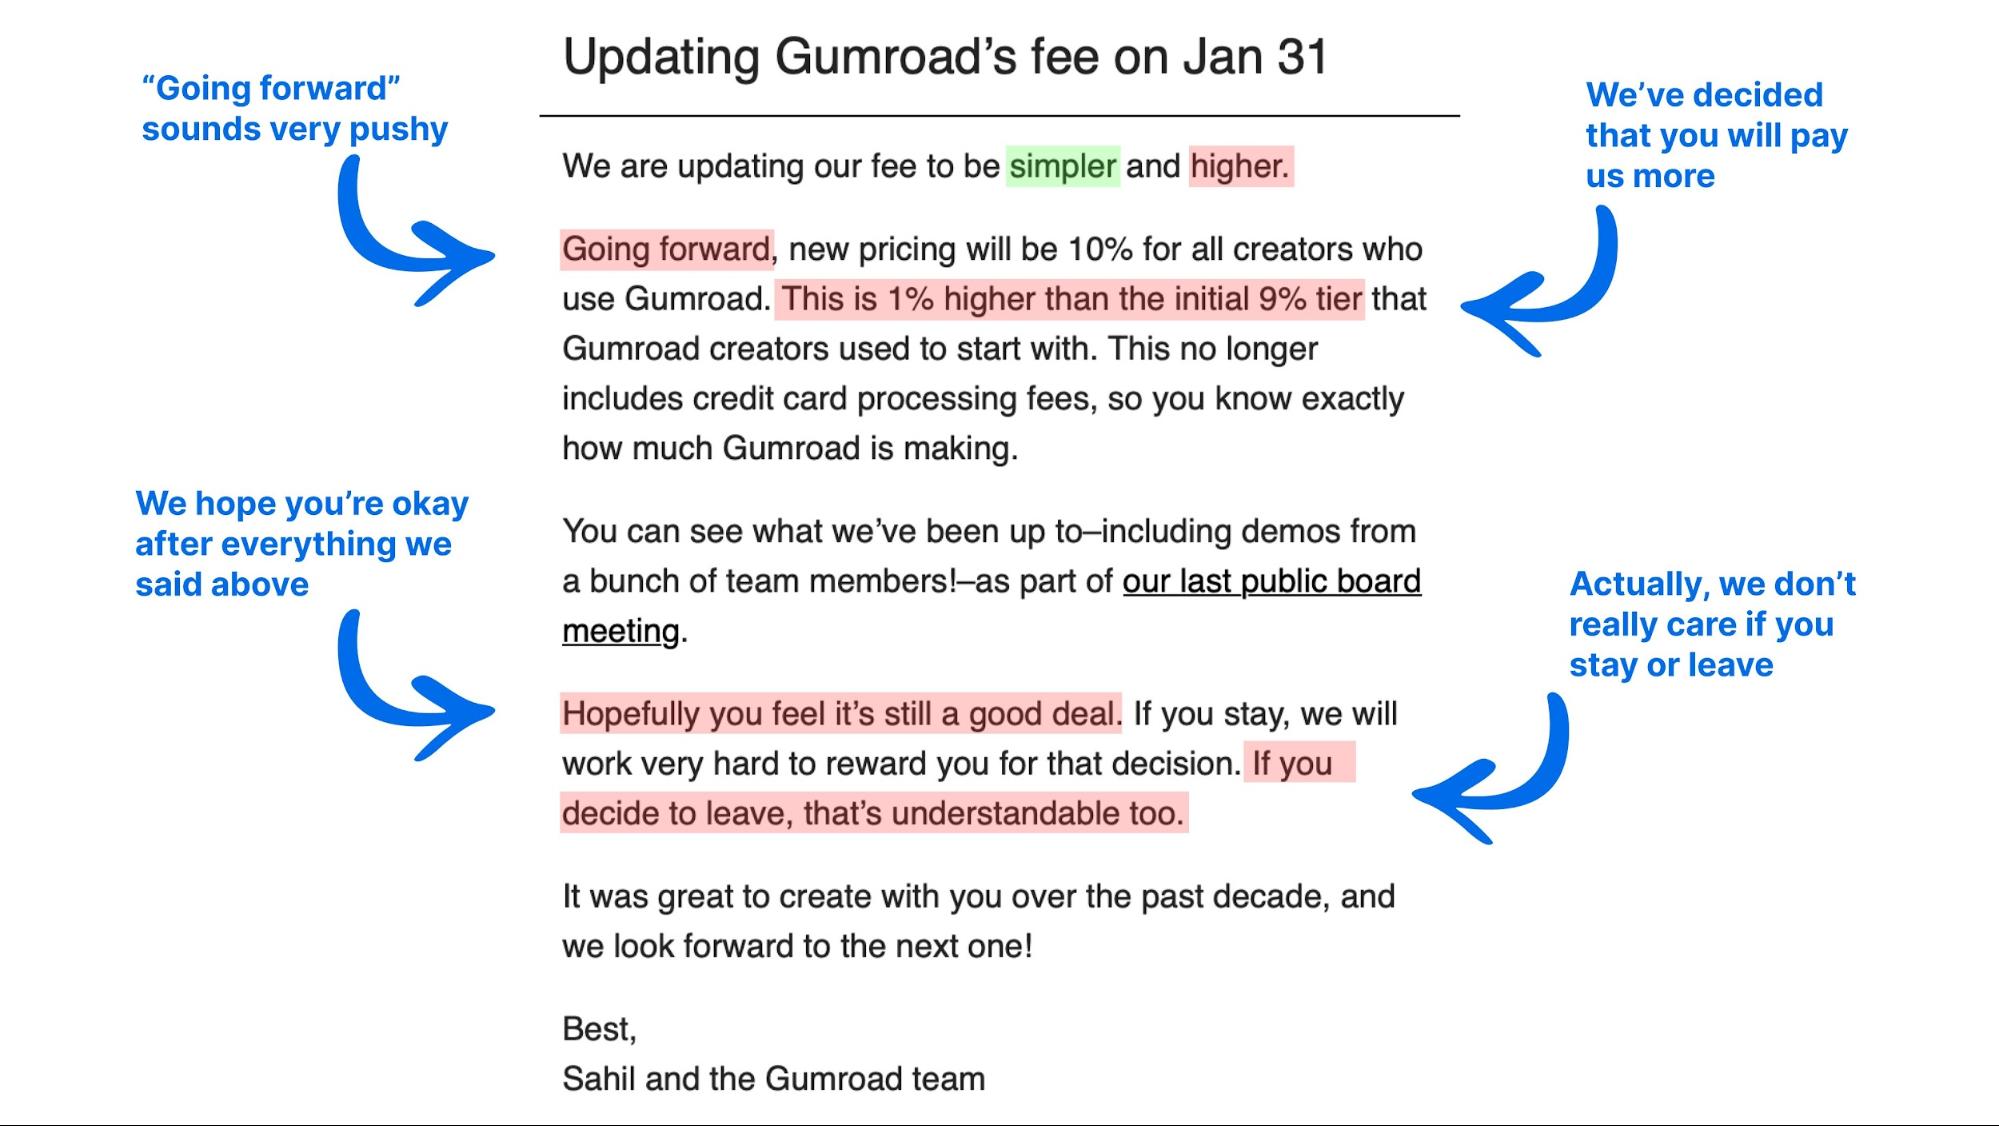 Gumroad's update about a price increase